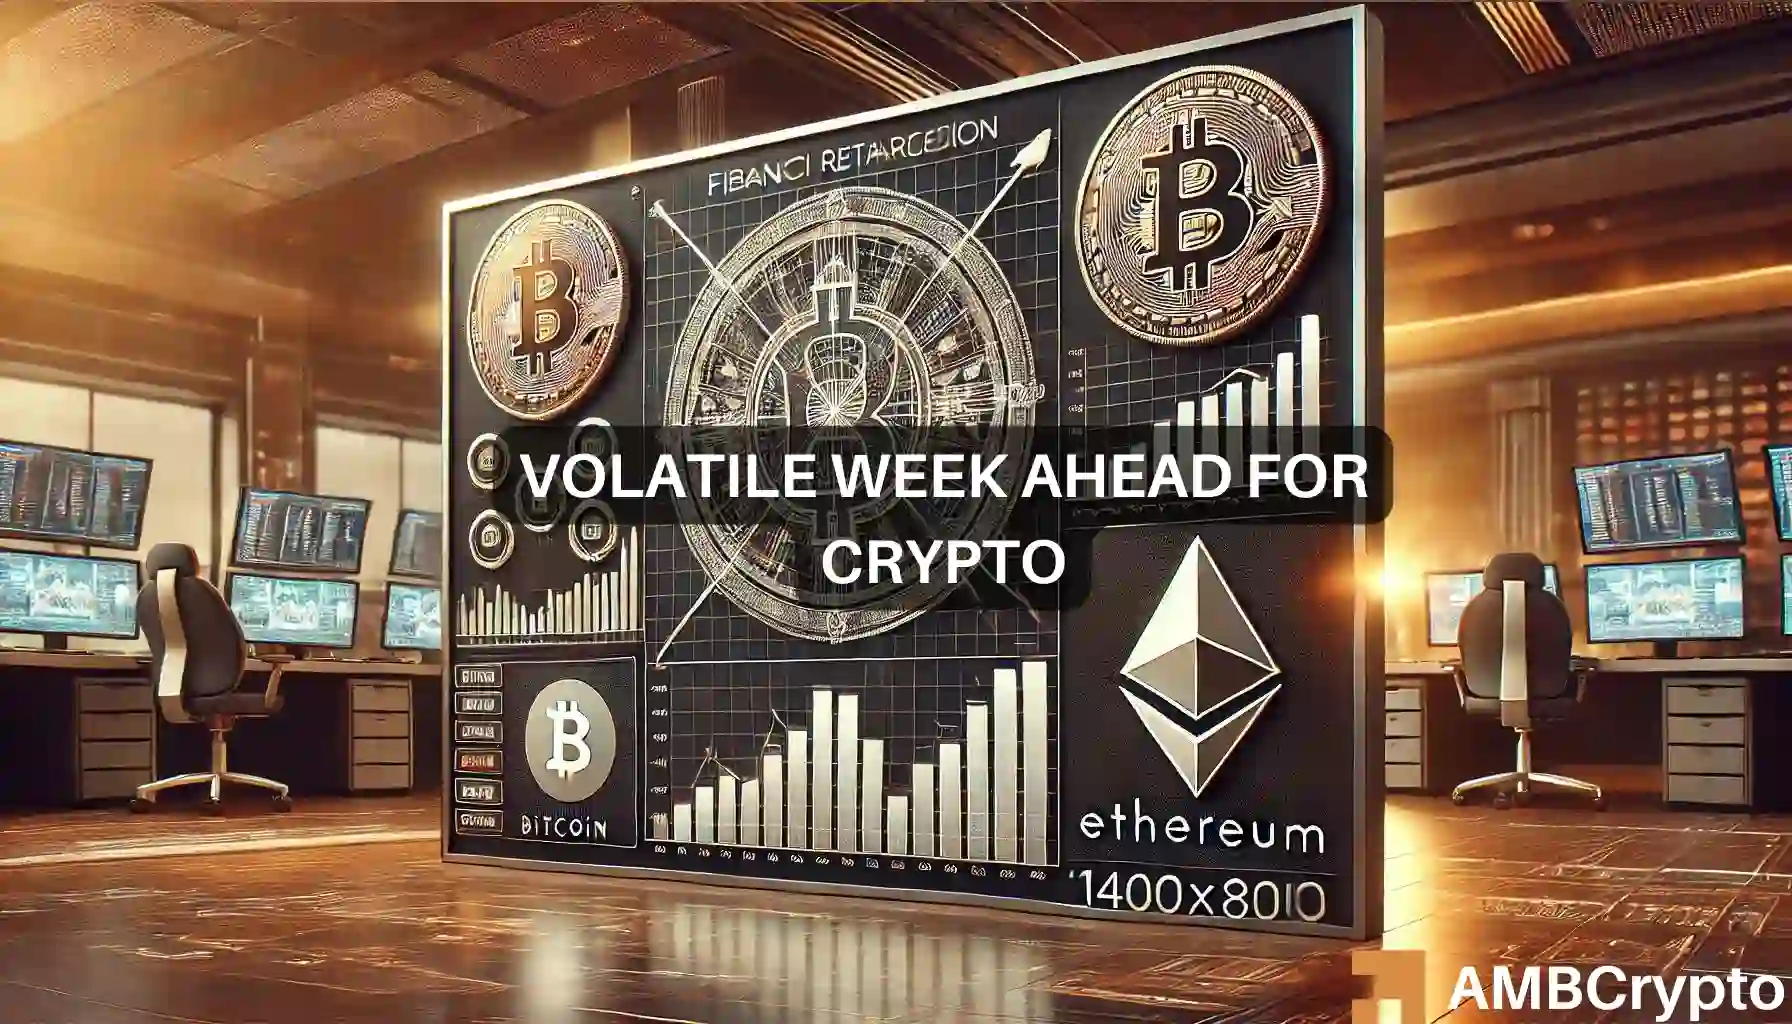 Crypto week ahead: Market faces uncertainty after major downturn